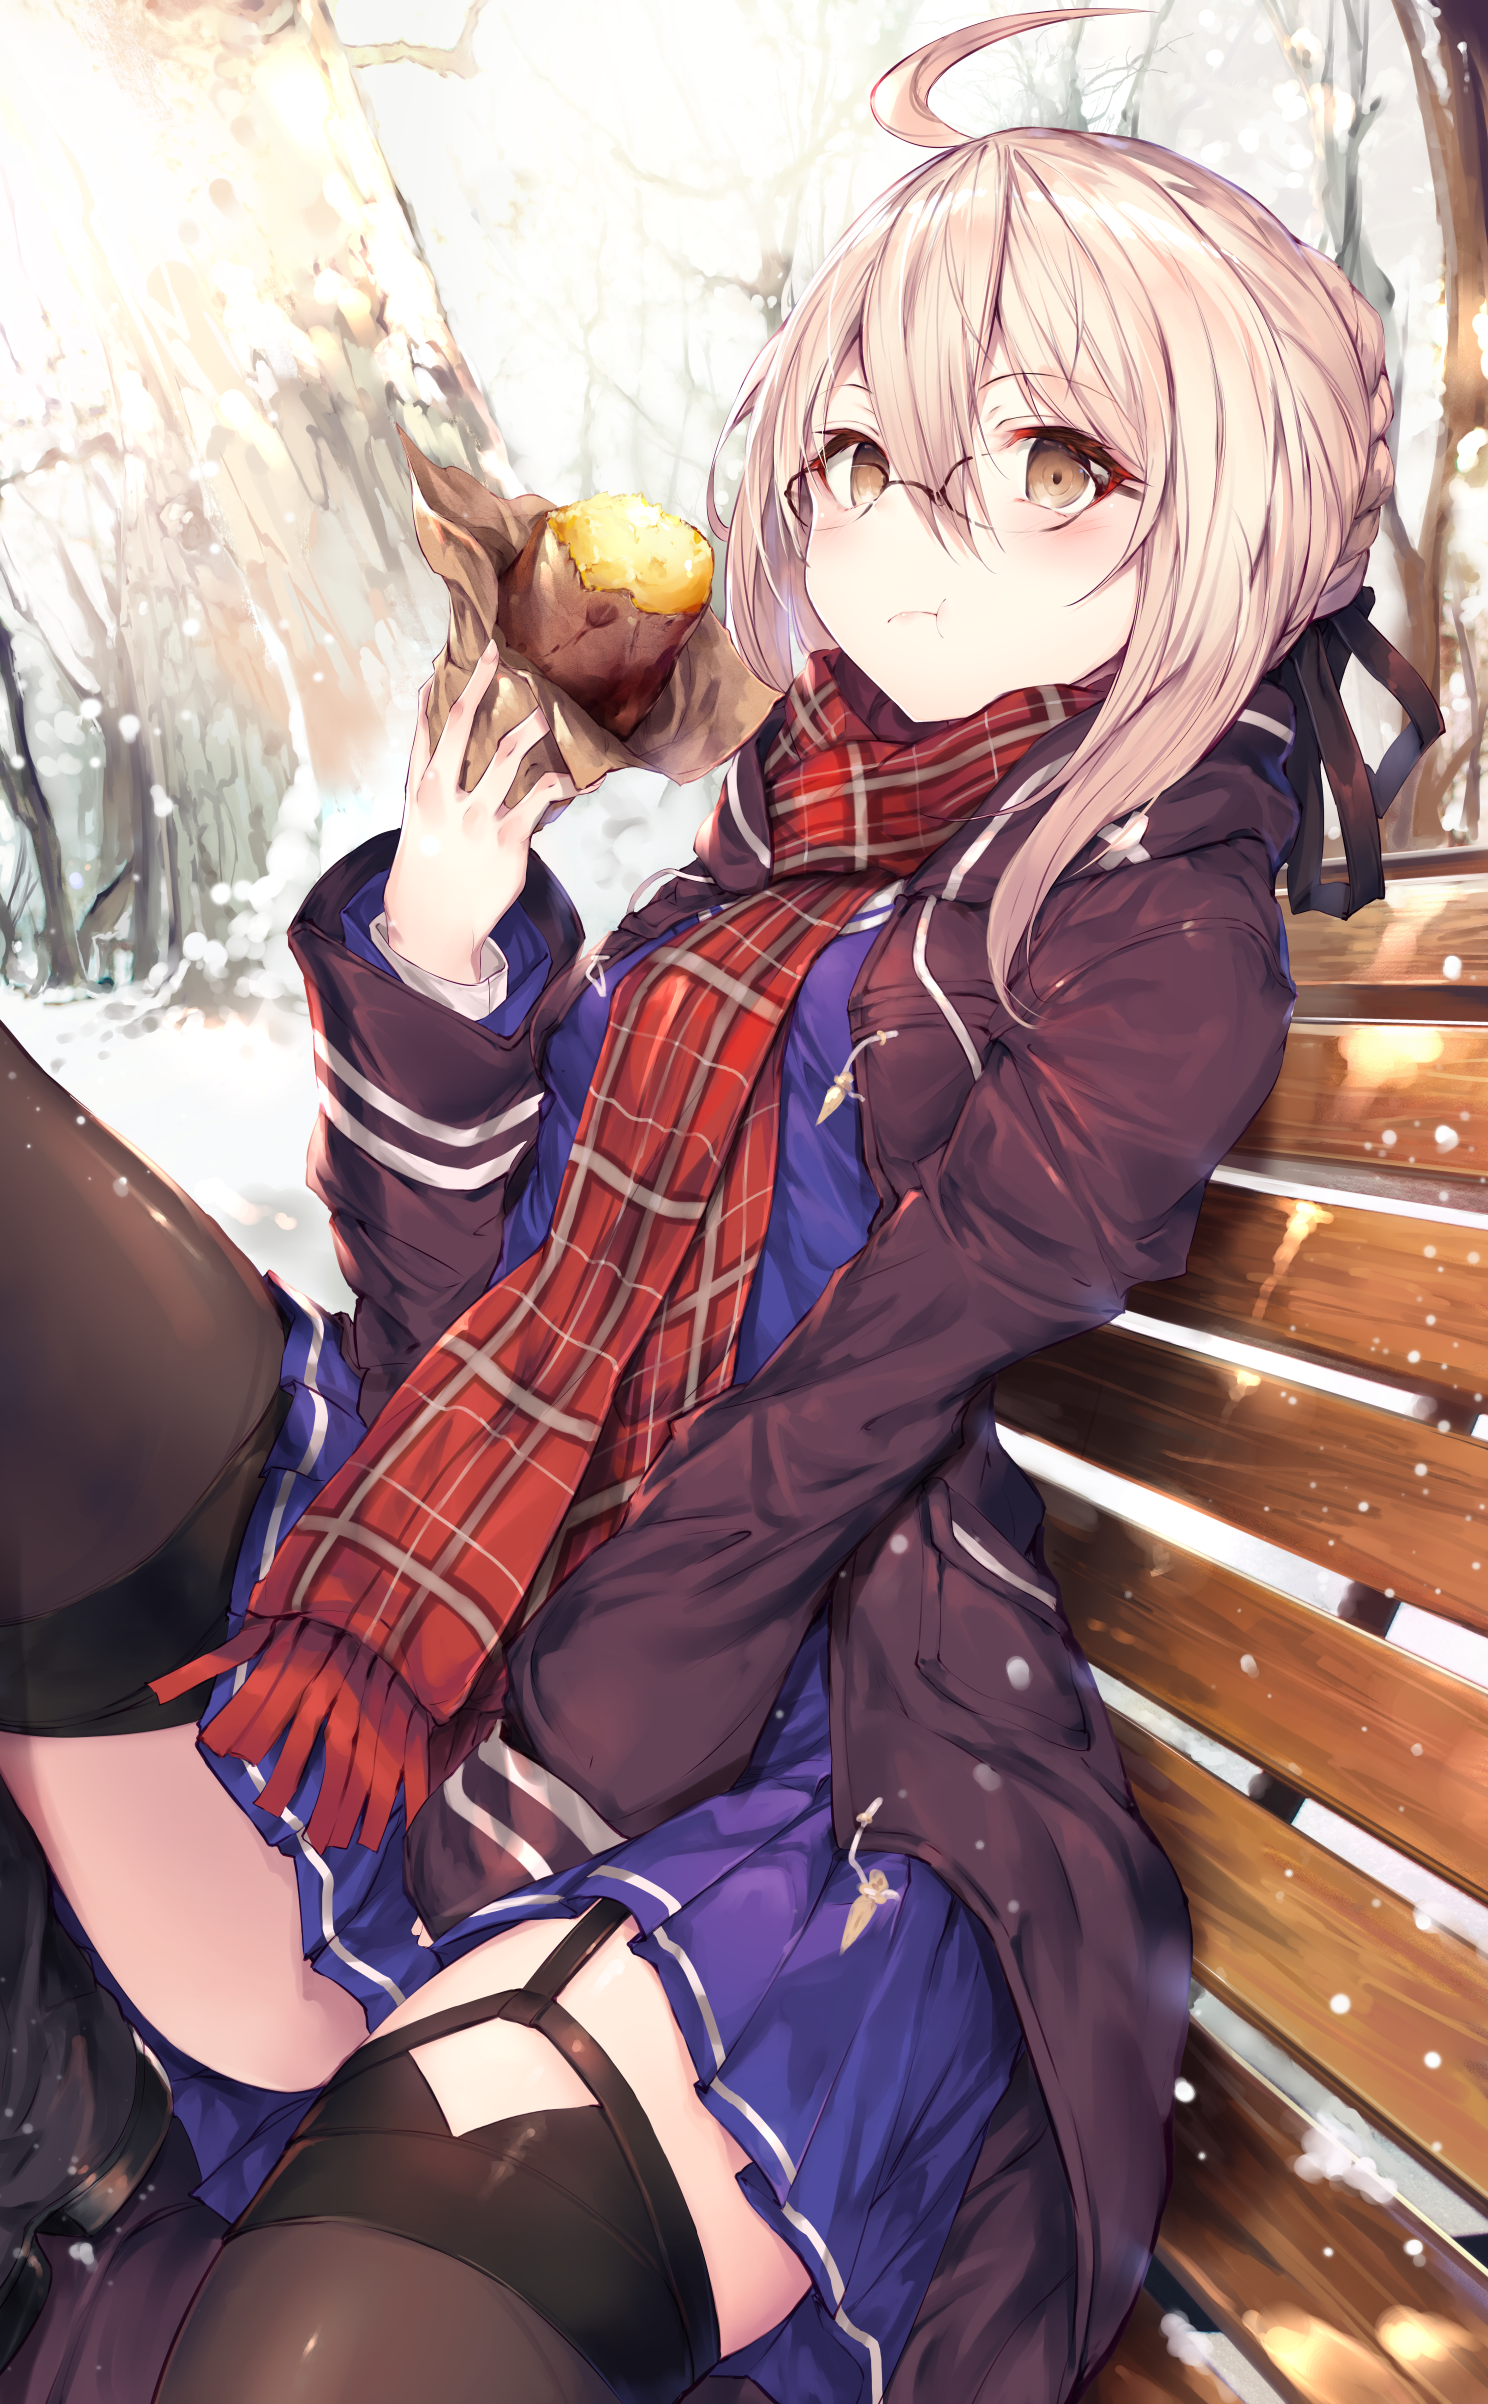 Anime 1488x2404 anime anime girls digital art artwork 2D portrait display blonde eating scarf glasses brown eyes thigh-highs bench Fal Maro Fate series Fate/Grand Order Artoria Pendragon Mysterious Heroine X (Fate/Grand Order) Mysterious Heroine X Alter (Fate/Grand Order)